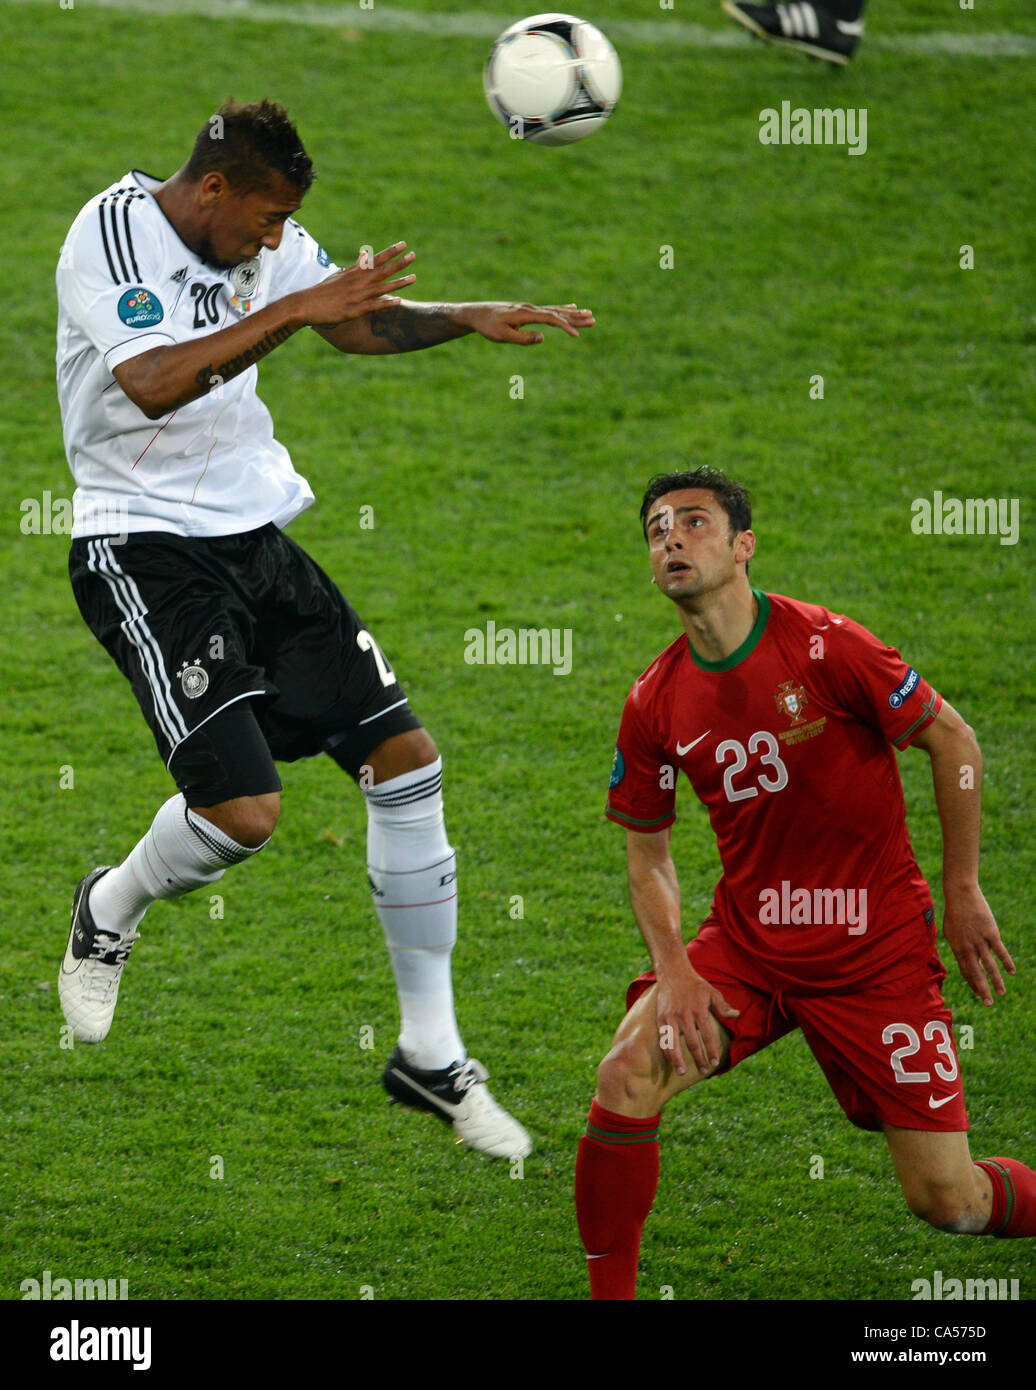 09.06.2012. Lviv Ukraine Germany's Jerome Boateng (L) and Portugal's Helder Postiga vie for the ball during UEFA EURO 2012 group B soccer match Germany vs Portugal at Arena Lviv in Lviv, the Ukraine, 09 June 2012. Germany won the game by a score of 1-0. Stock Photo